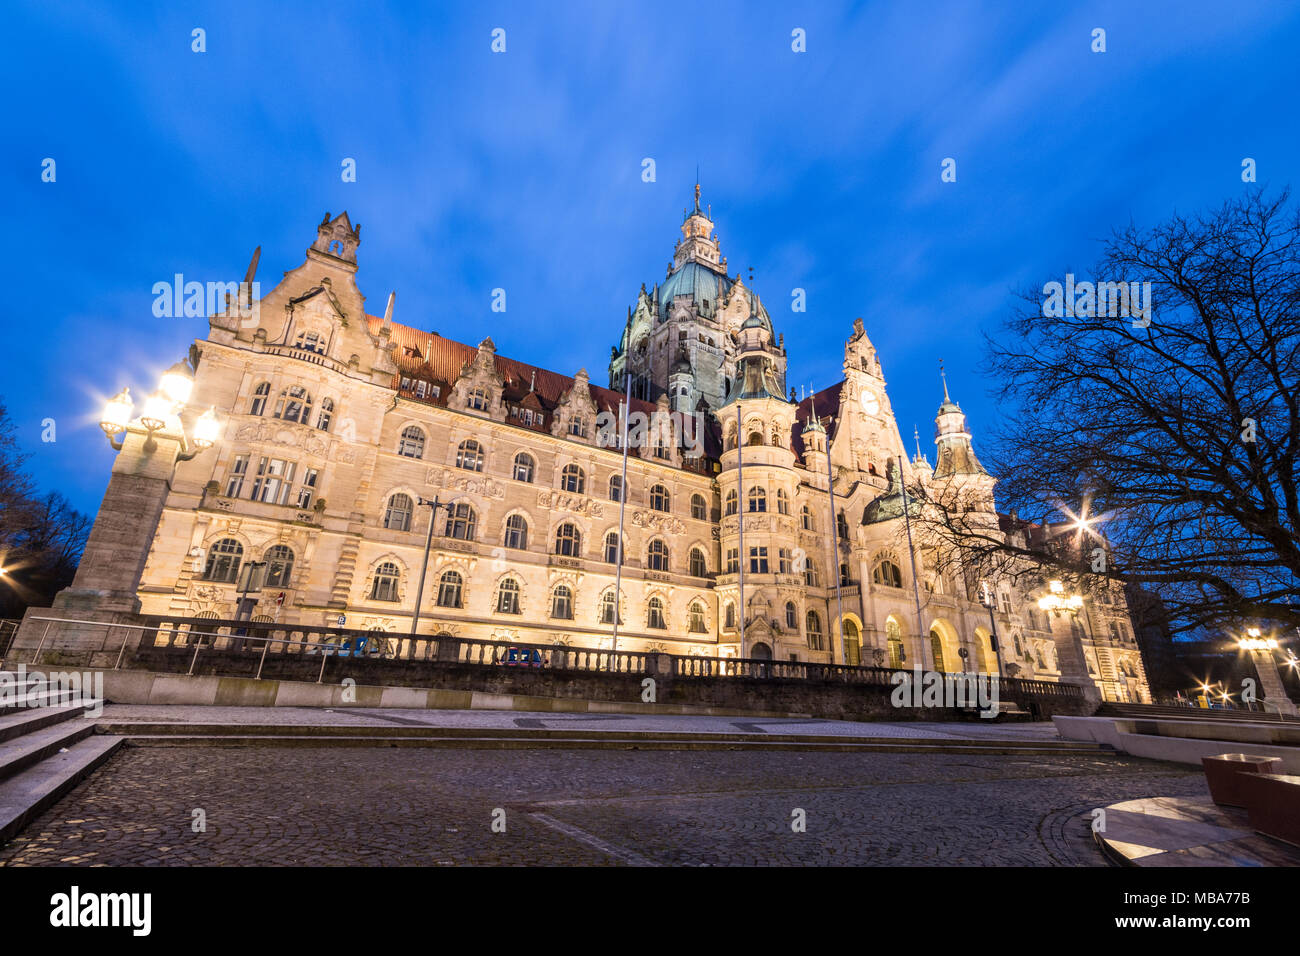 Hannover, Germany. Night view of the New Town Hall (Neues Rathaus), a magnificent castle-like city hall of the era of Wilhelm II in eclectic style Stock Photo